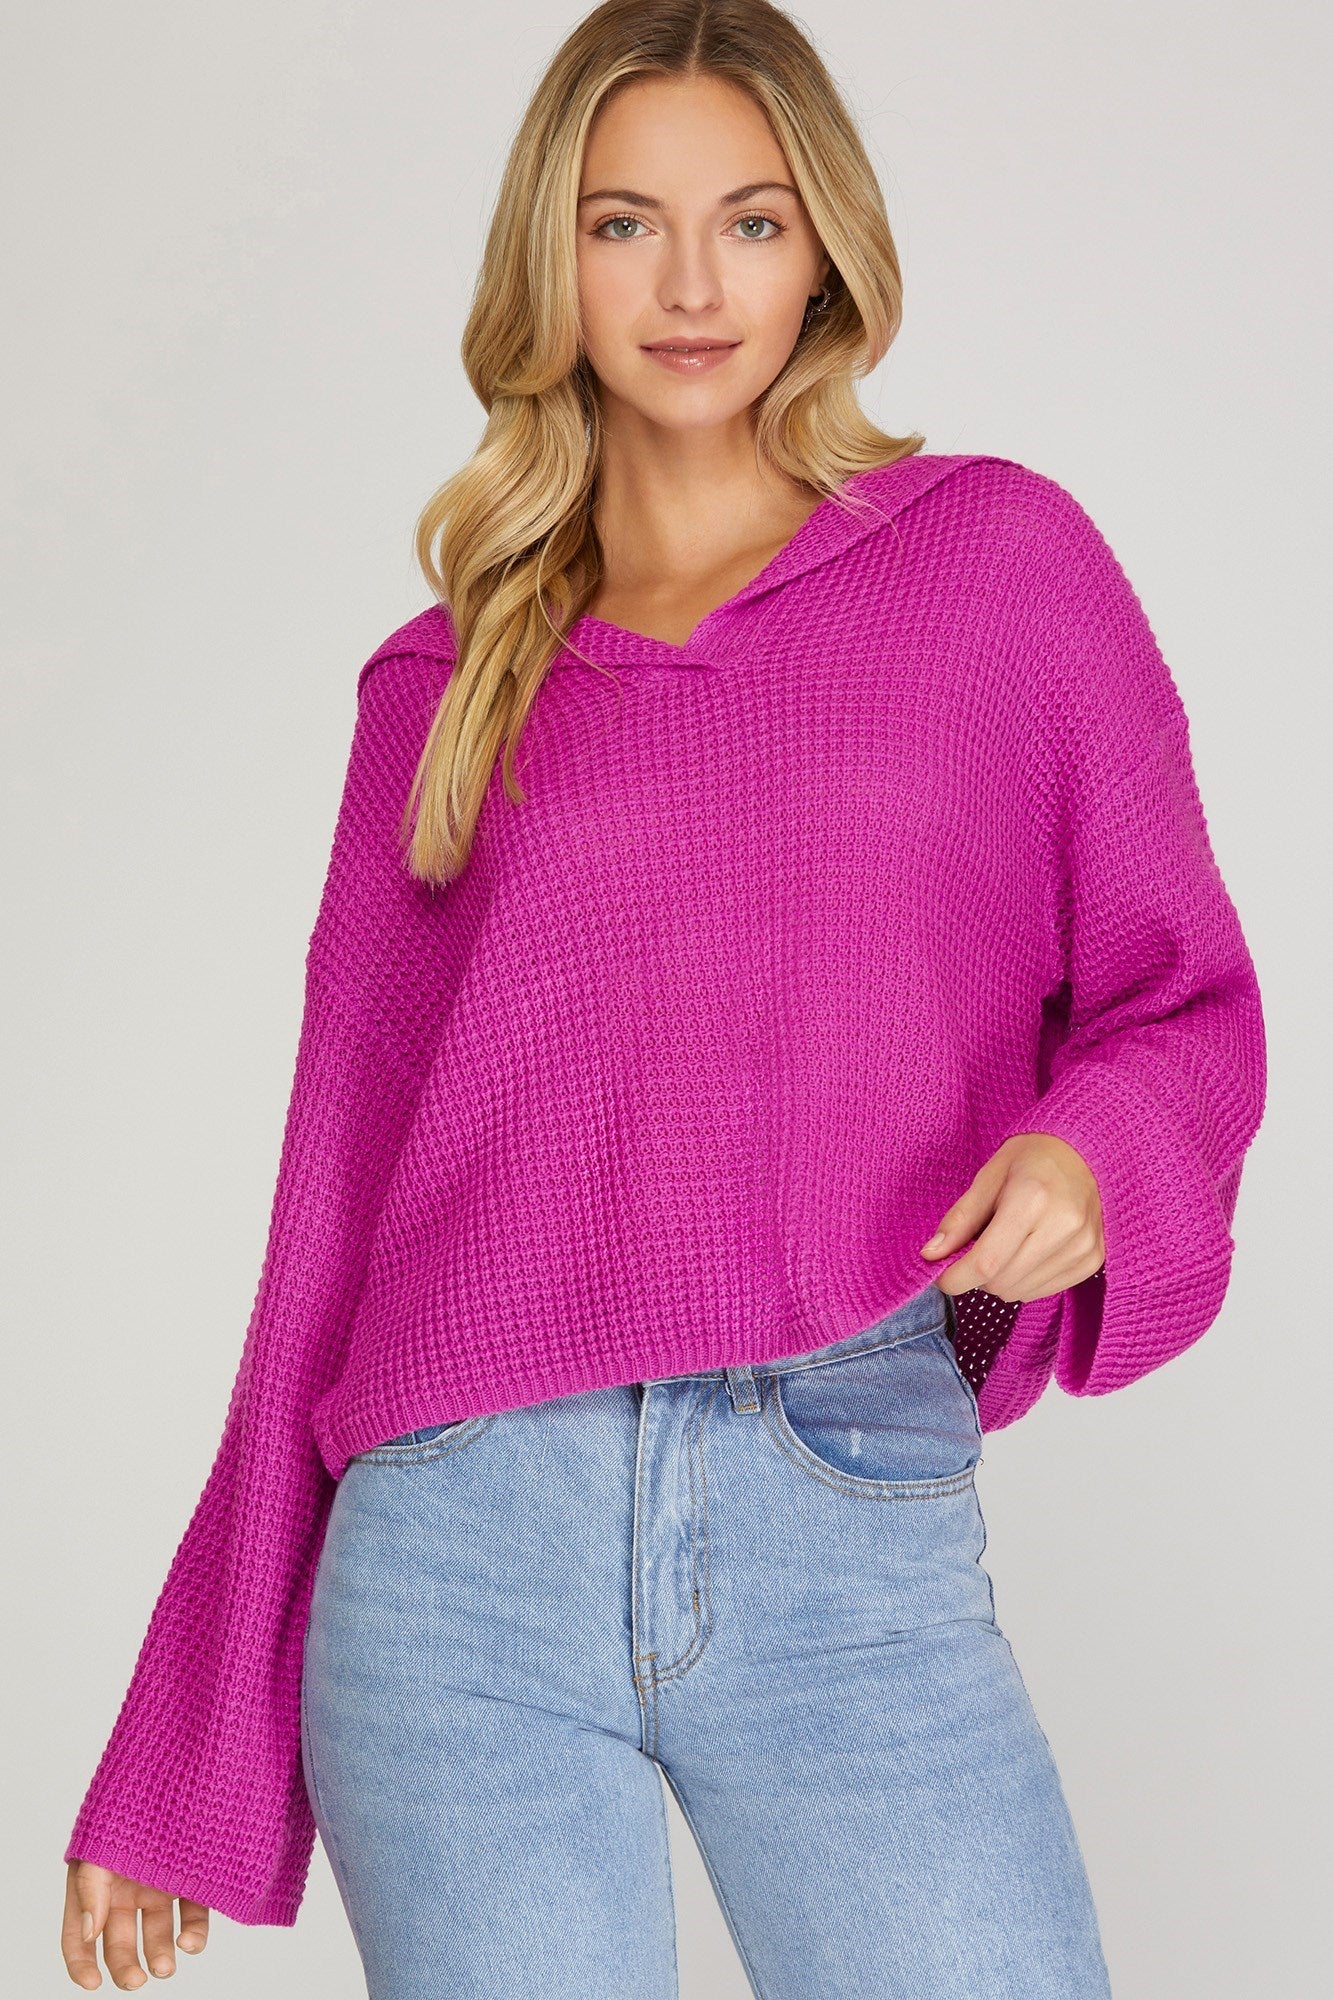 Hot Pink Collared Sweater